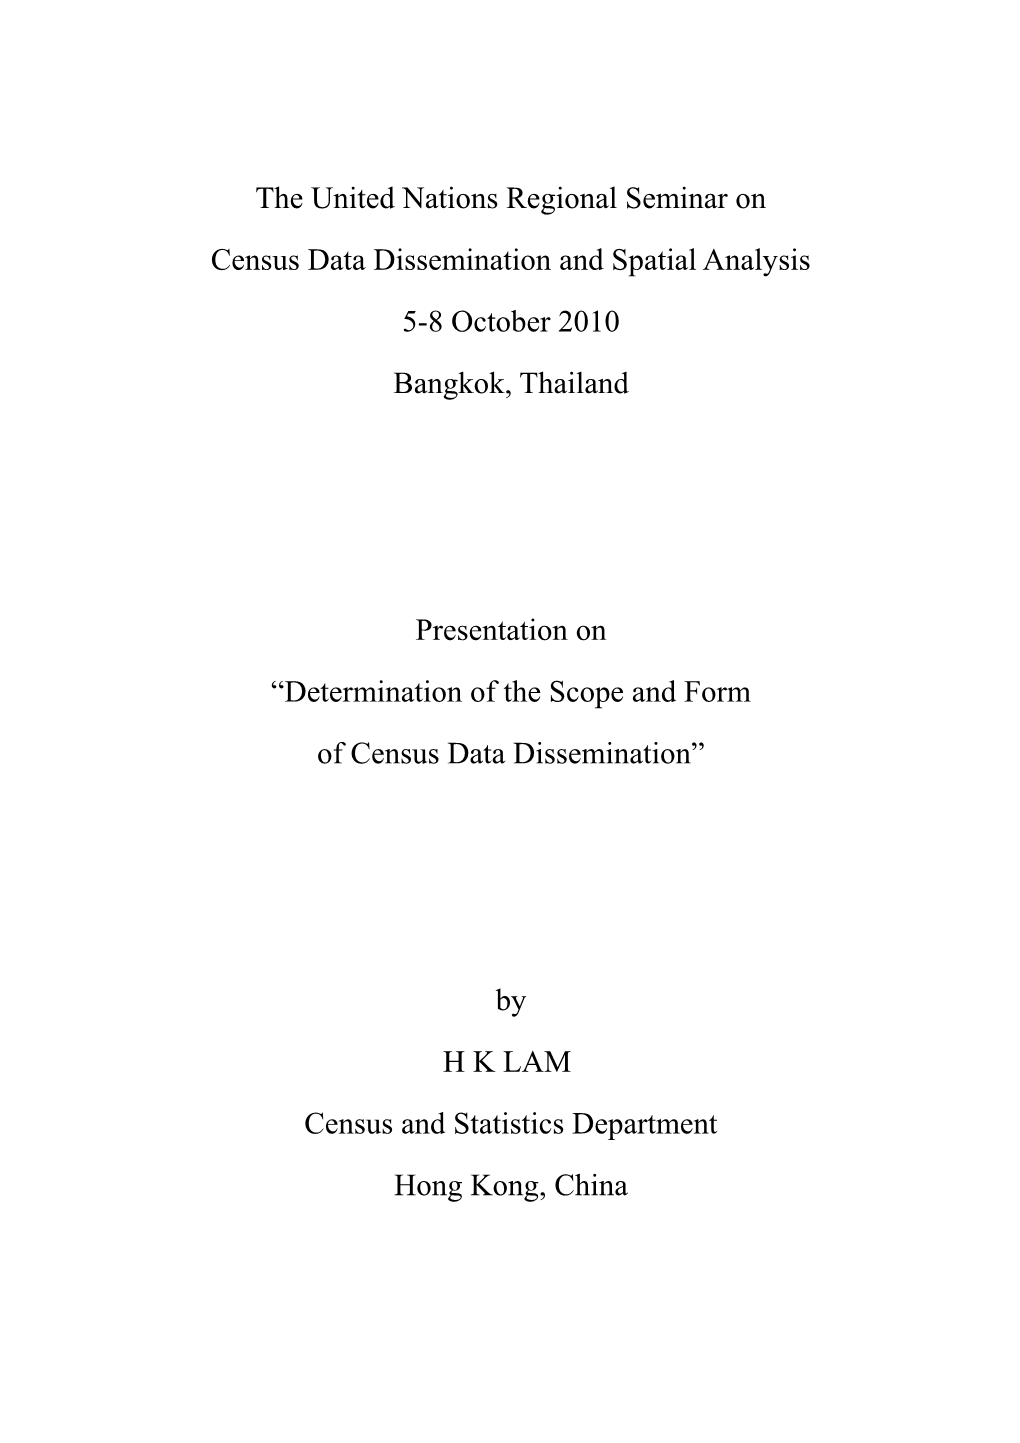 Determination of the Scope and Form of Census Data Dissemination in Hong Kong